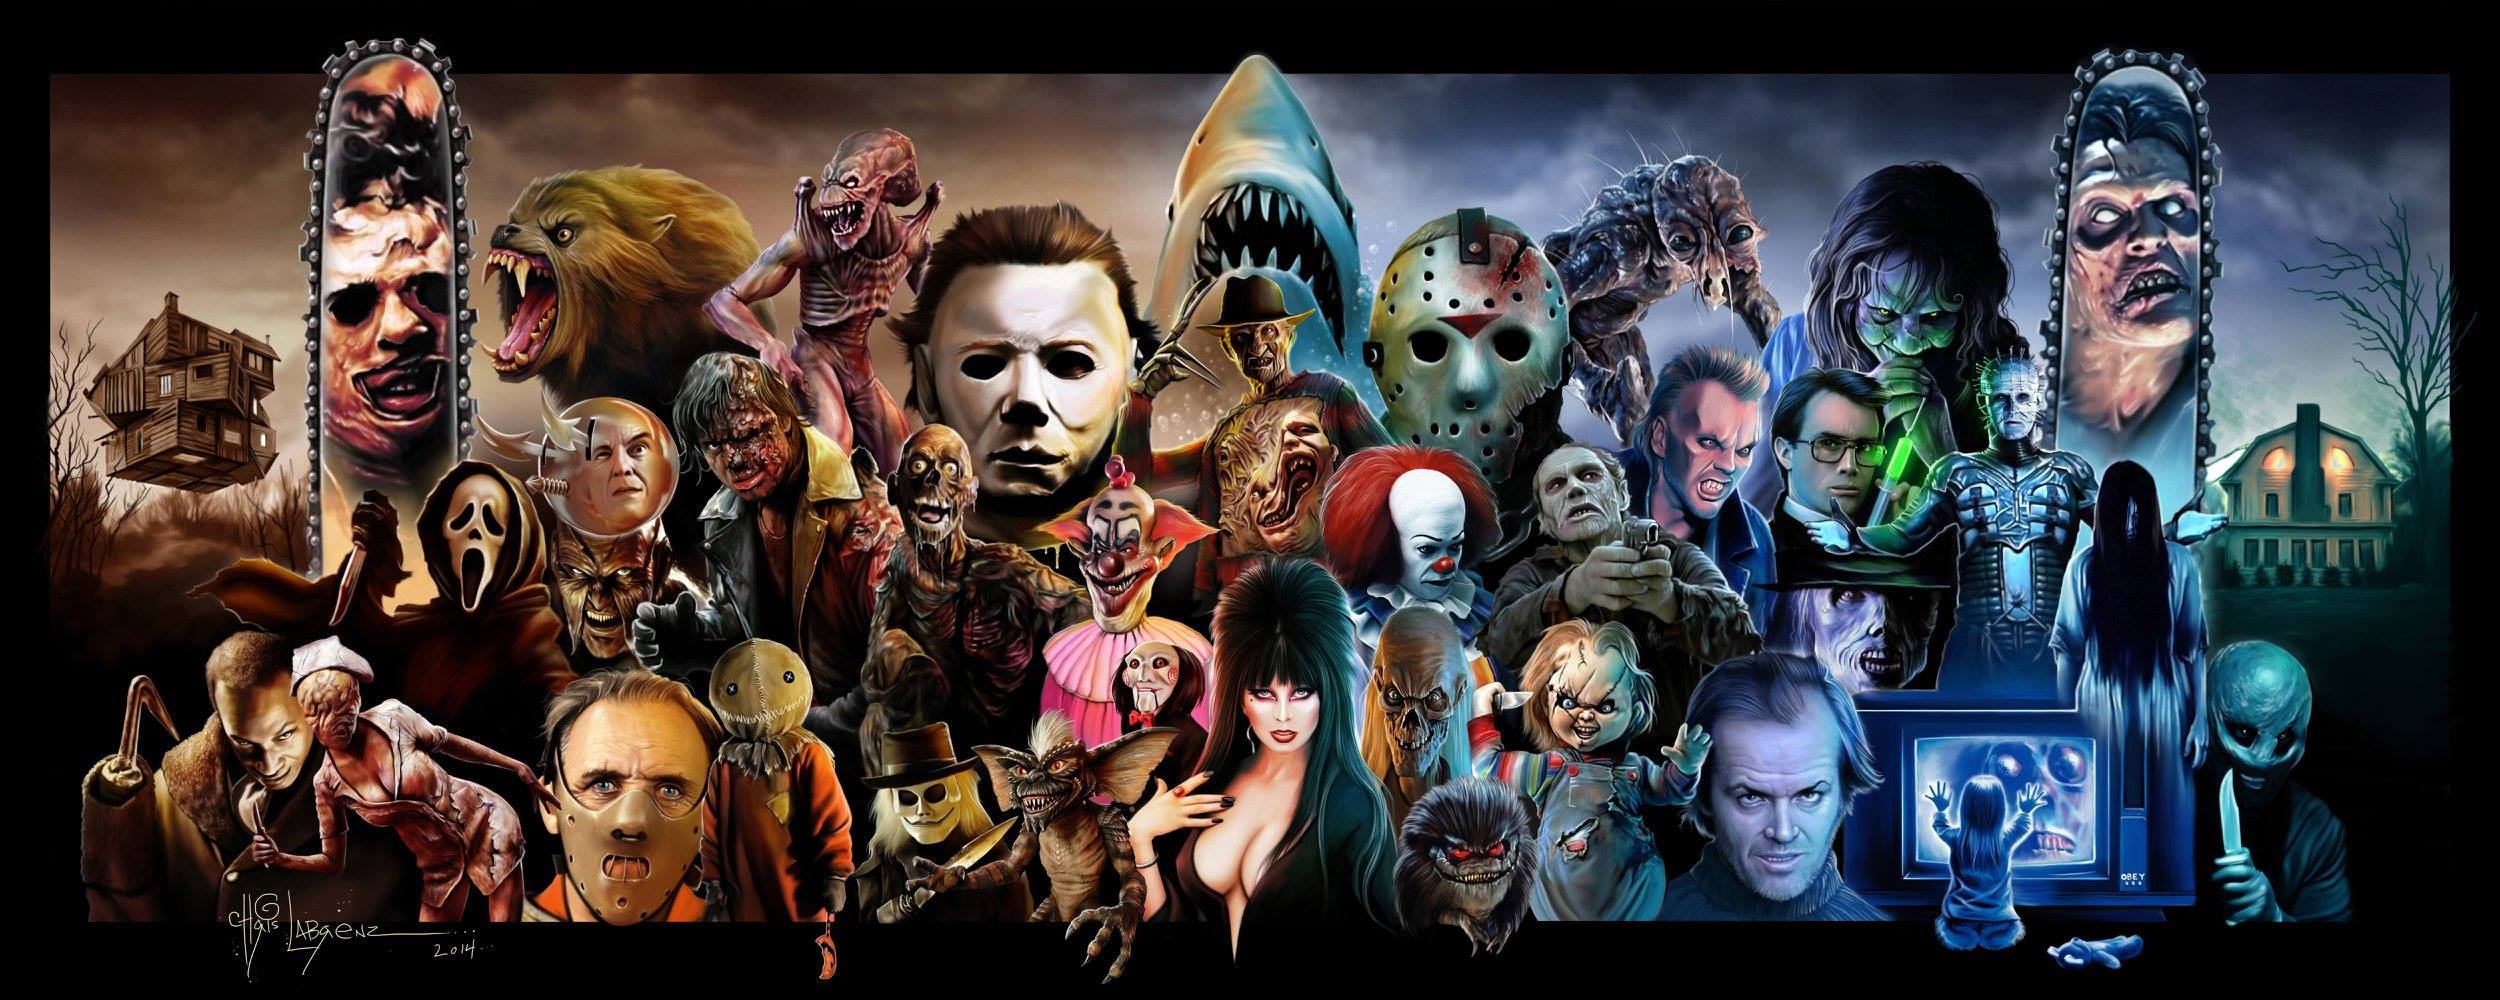 Guess Almost All Of Us Watch Horror Movies So Who Is Your Favorite